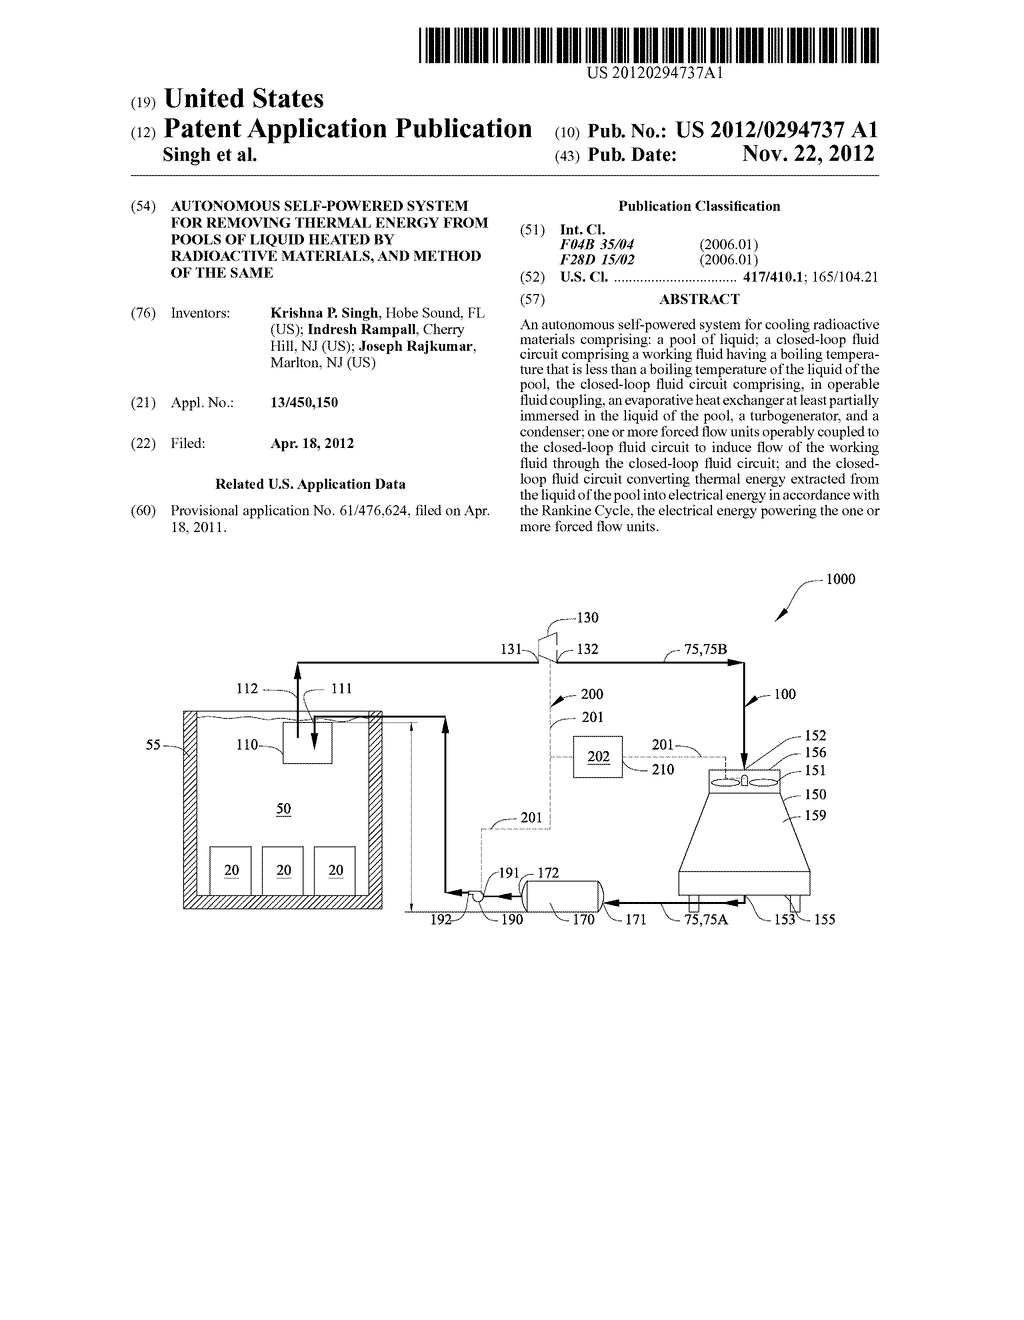 AUTONOMOUS SELF-POWERED SYSTEM FOR REMOVING THERMAL ENERGY FROM POOLS OF     LIQUID HEATED BY RADIOACTIVE MATERIALS, AND METHOD OF THE SAME - diagram, schematic, and image 01